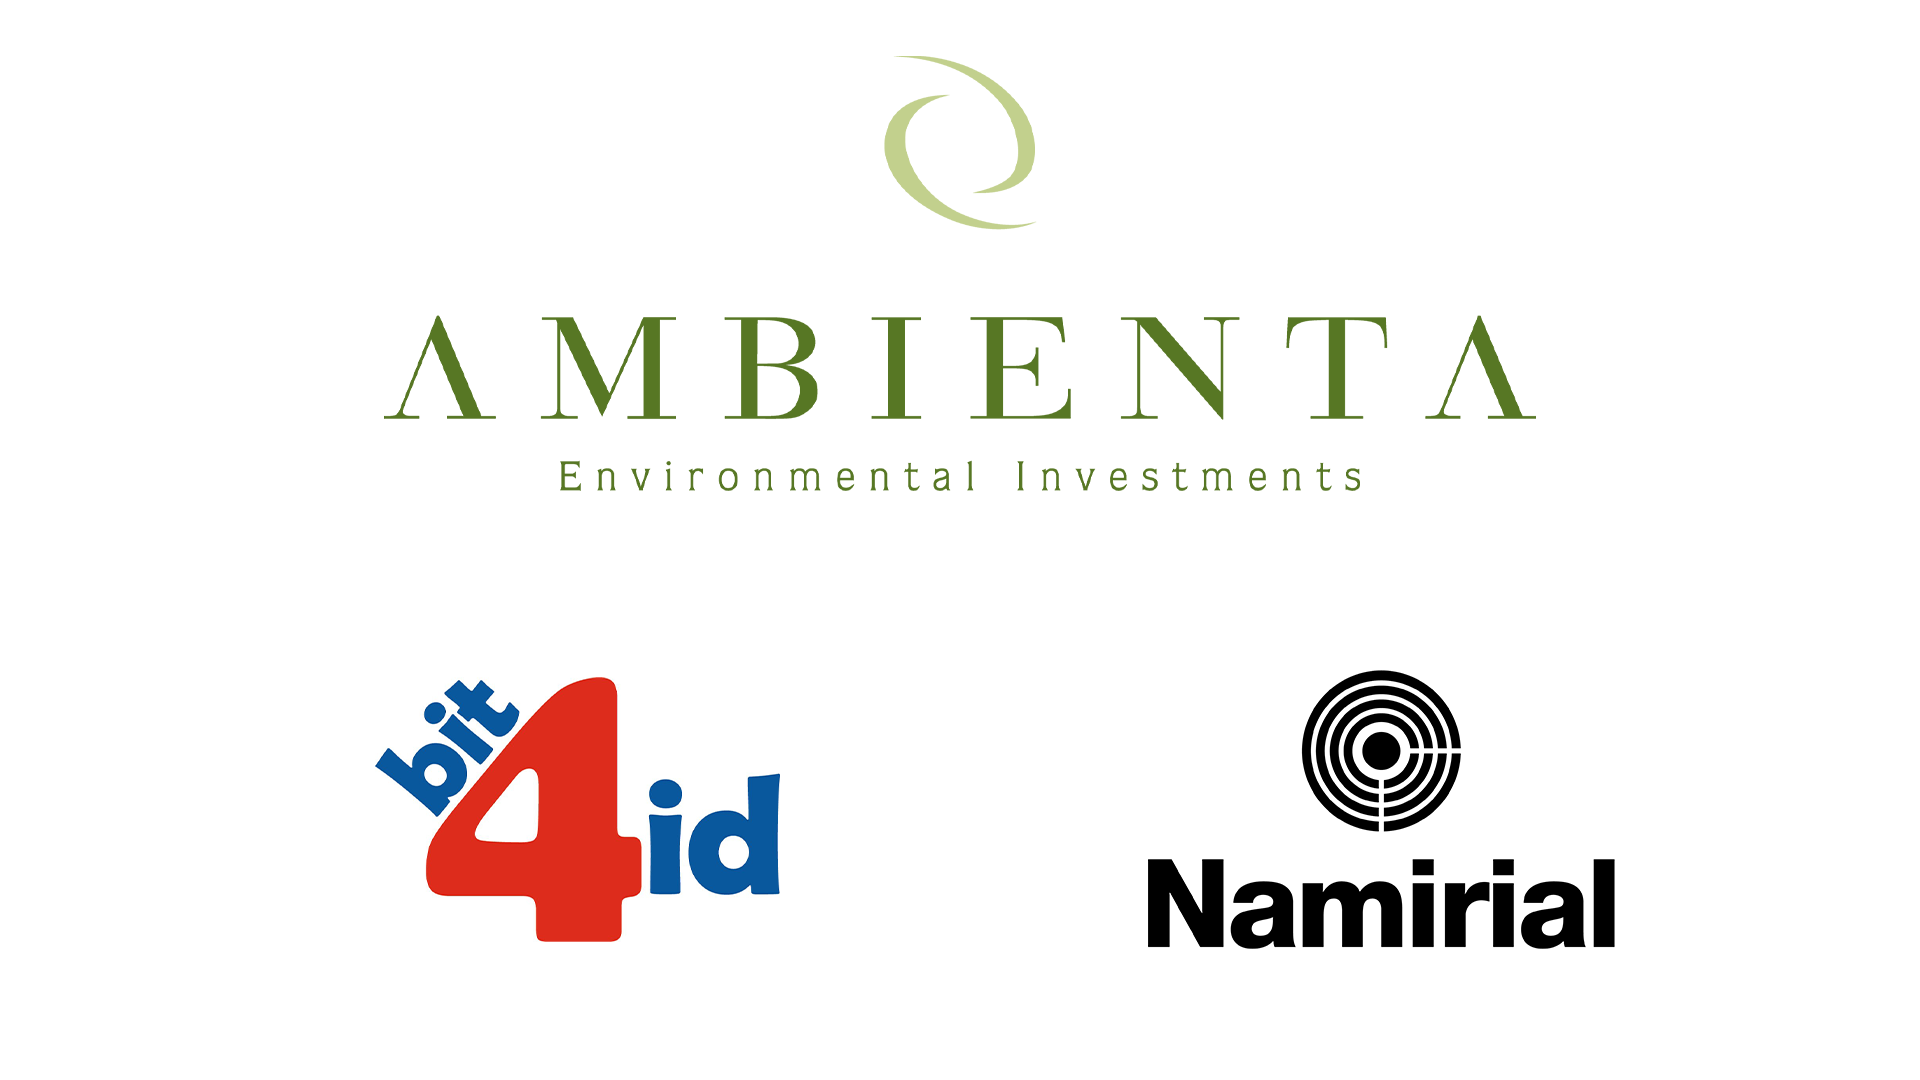 Ambienta completes the acquisition of Bit4ID